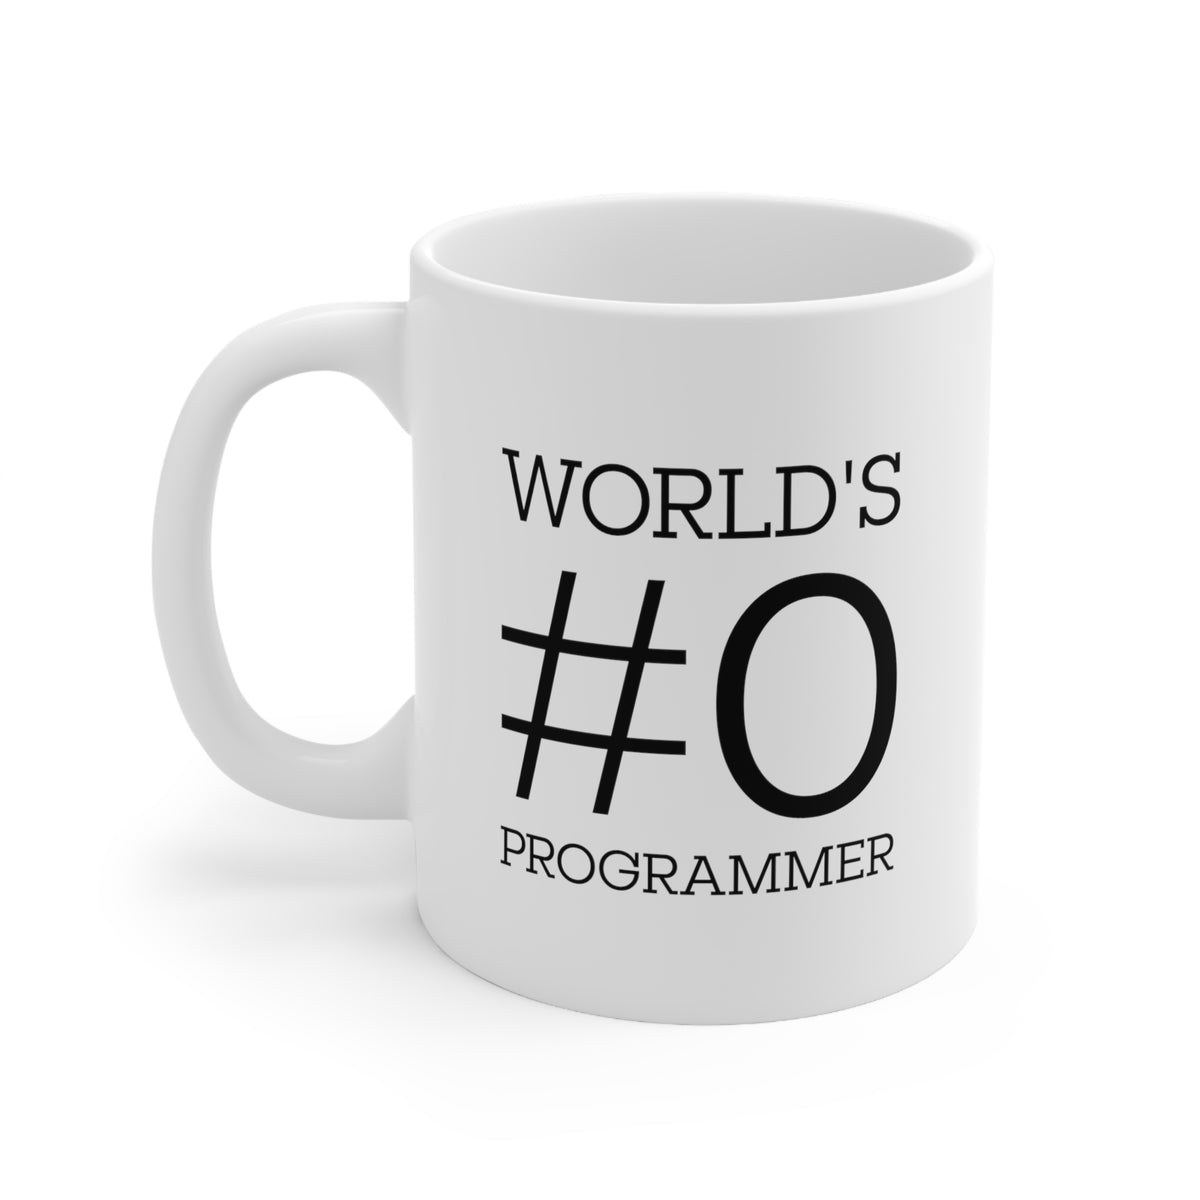 Best Programmer Coffee Mug - World's #0 Programmer Cup - Funny Computer Coding Gifts